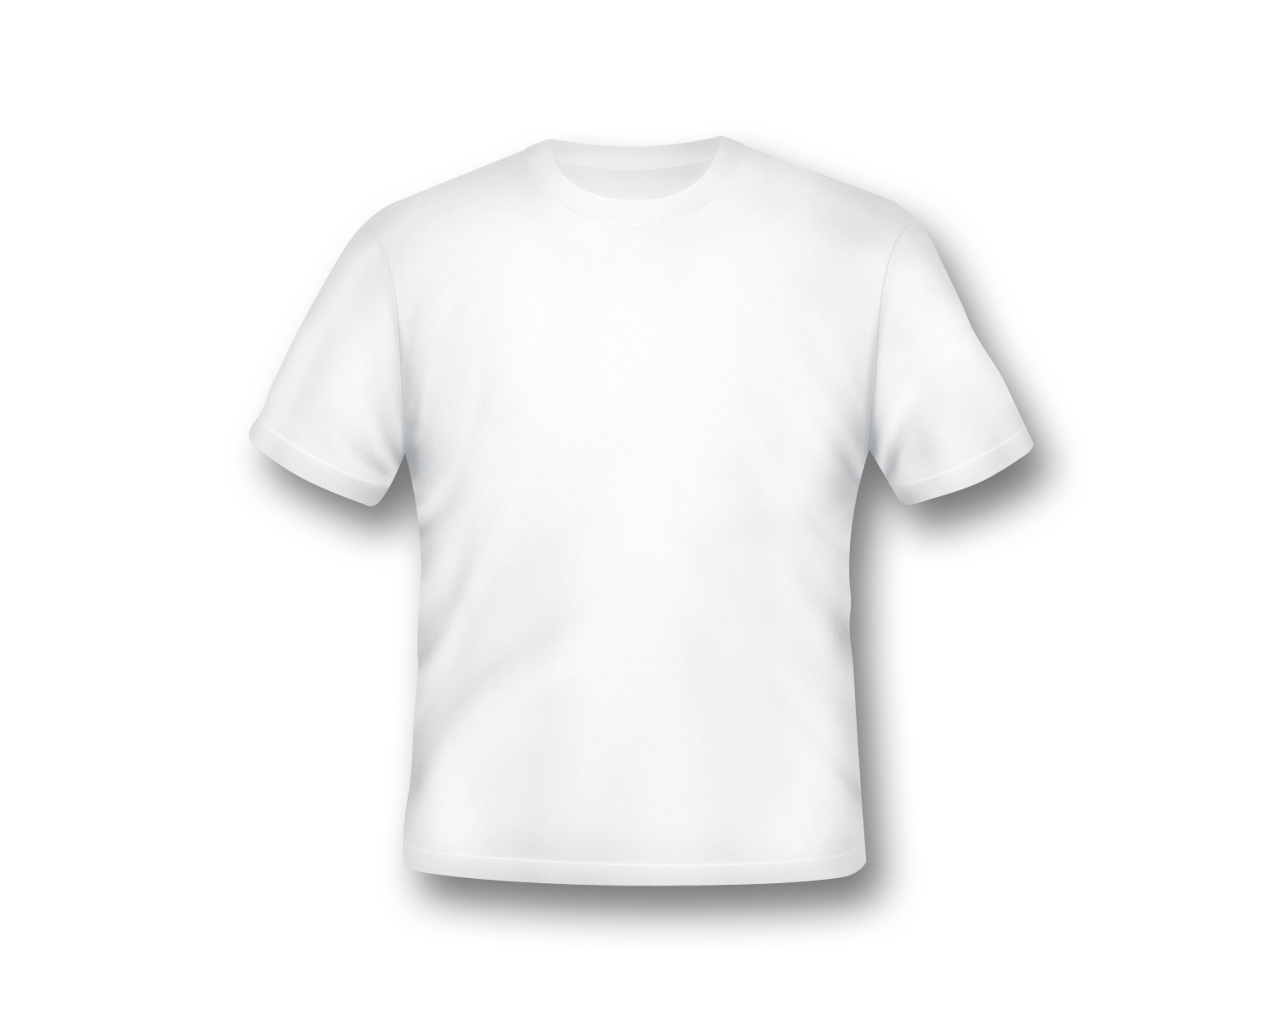 download-blank-white-t-shirt-template-hq-png-image-freepngimg